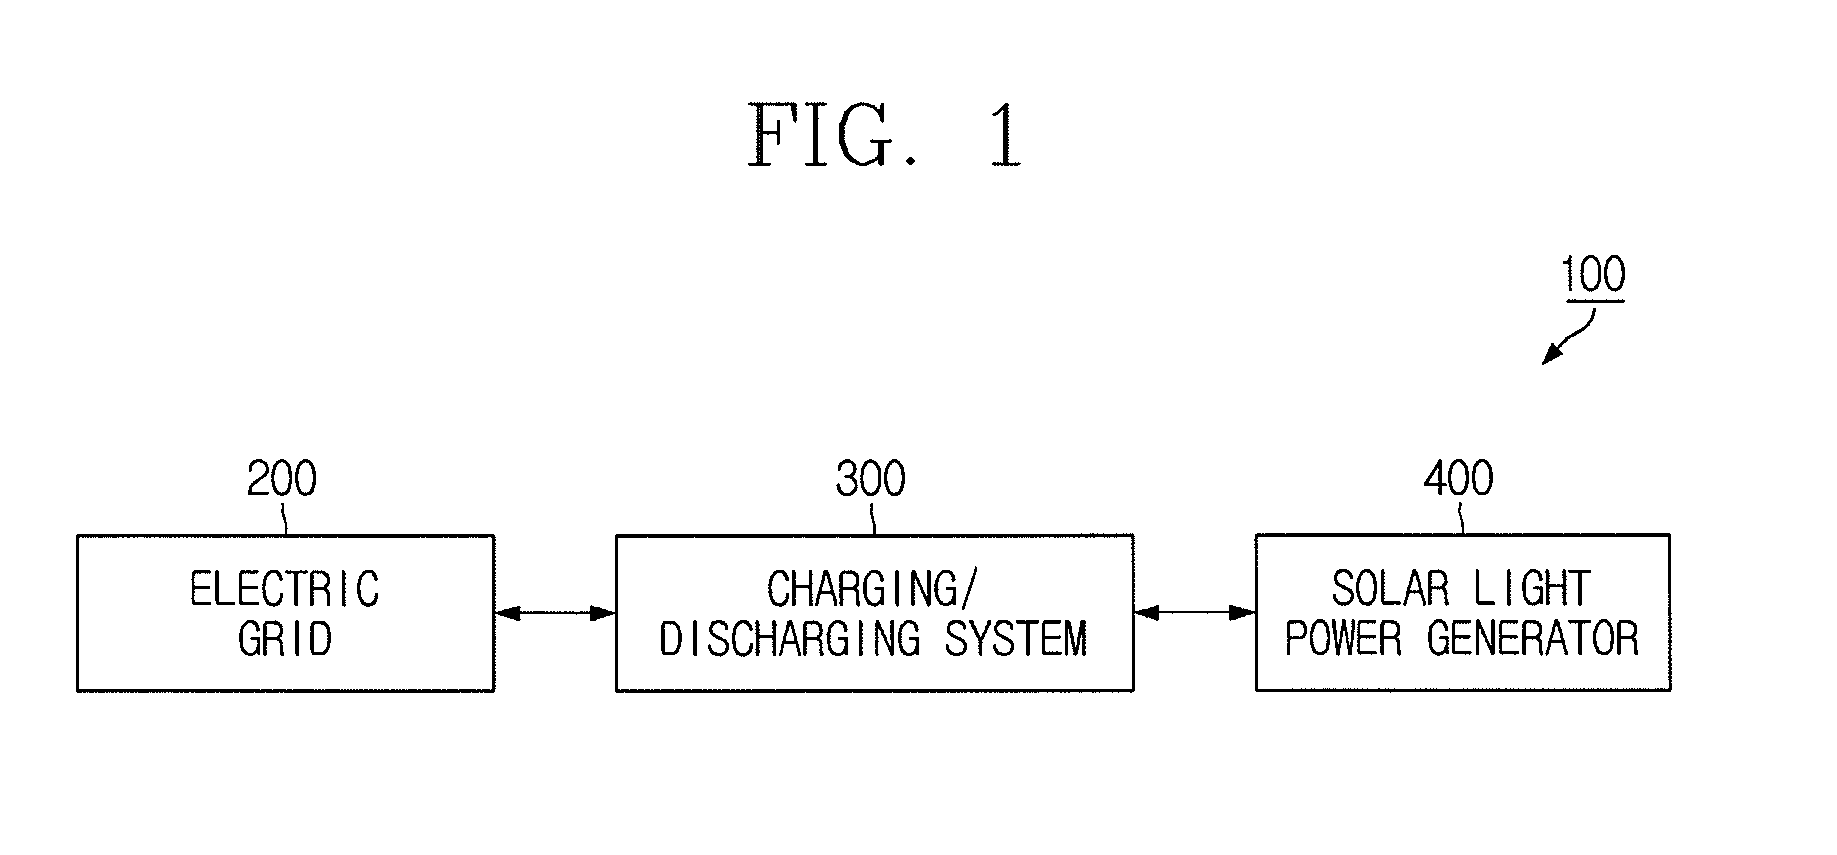 Charging/discharging system for solar light power generator in smart grid environment with real-time pricing, duplex convertor of charging/discharging system, and charging/discharging method for solar light power generator